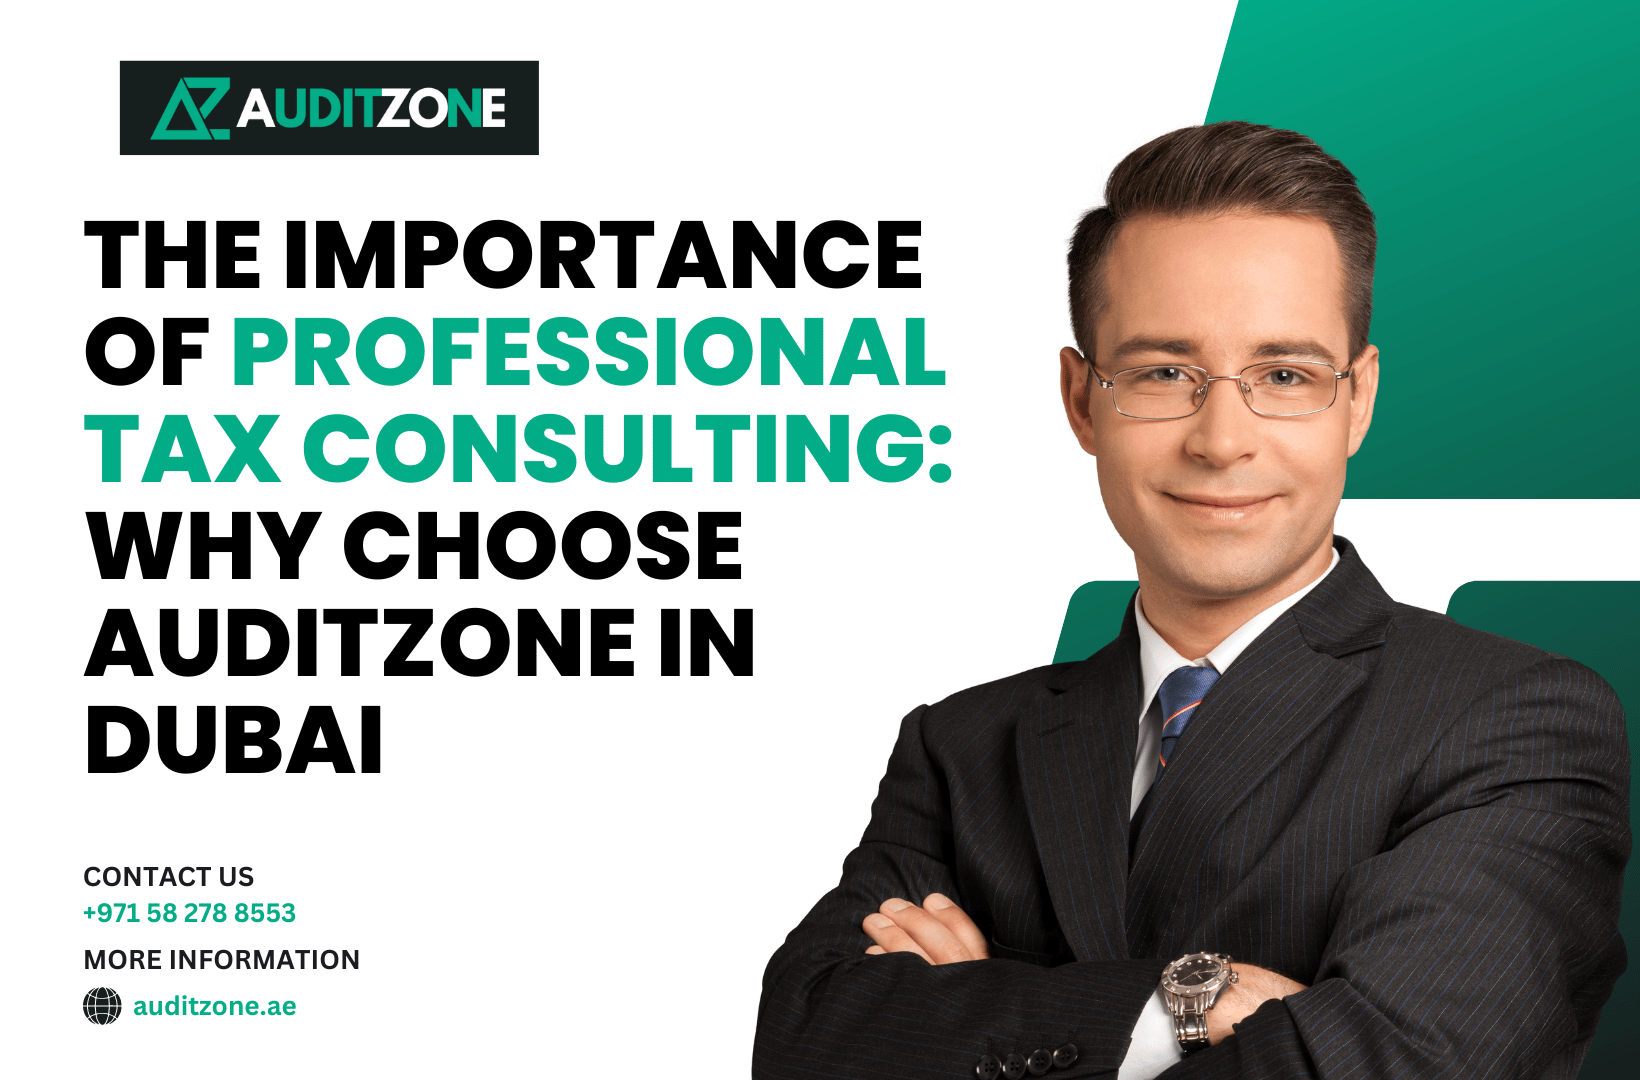 The Importance of Professional Tax Consulting Why Choose Auditzone in Dubai